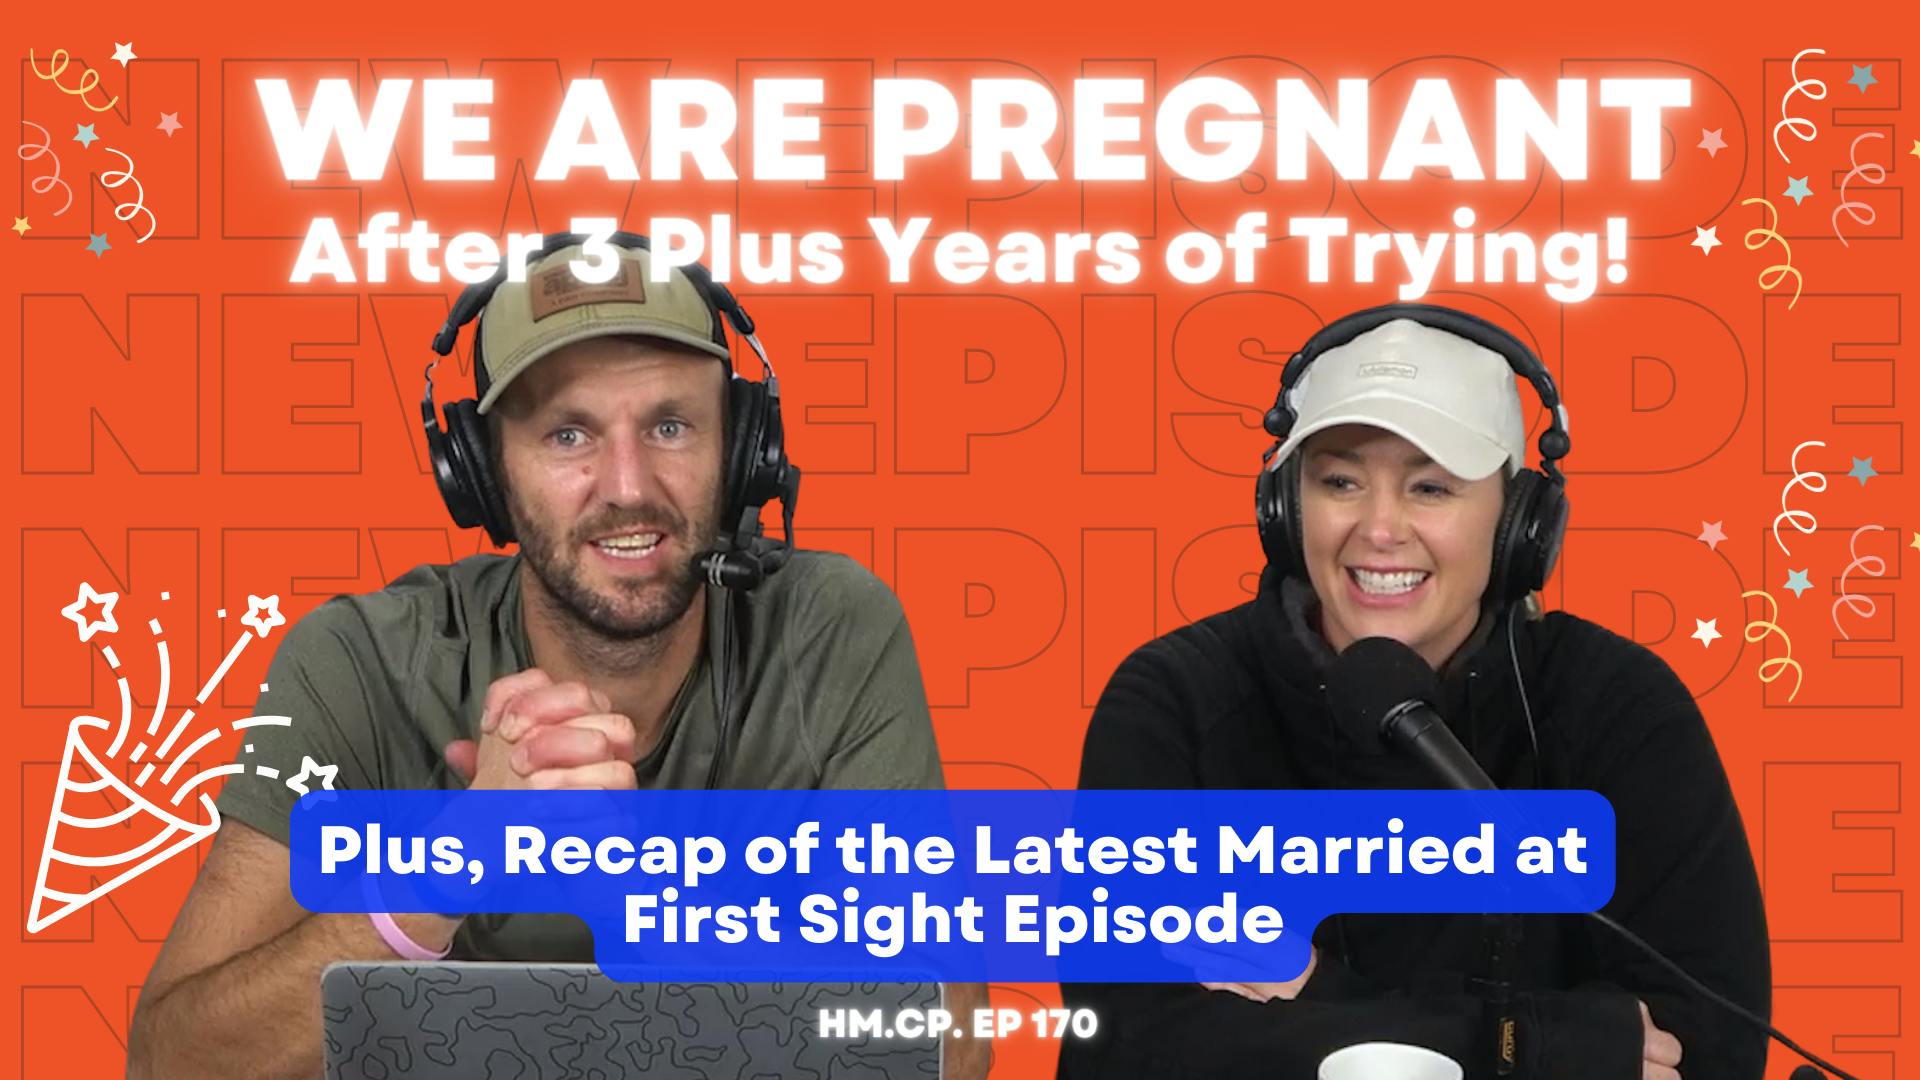 Ep 170.  WE ARE PREGNANT after 3 Plus Years of Trying!